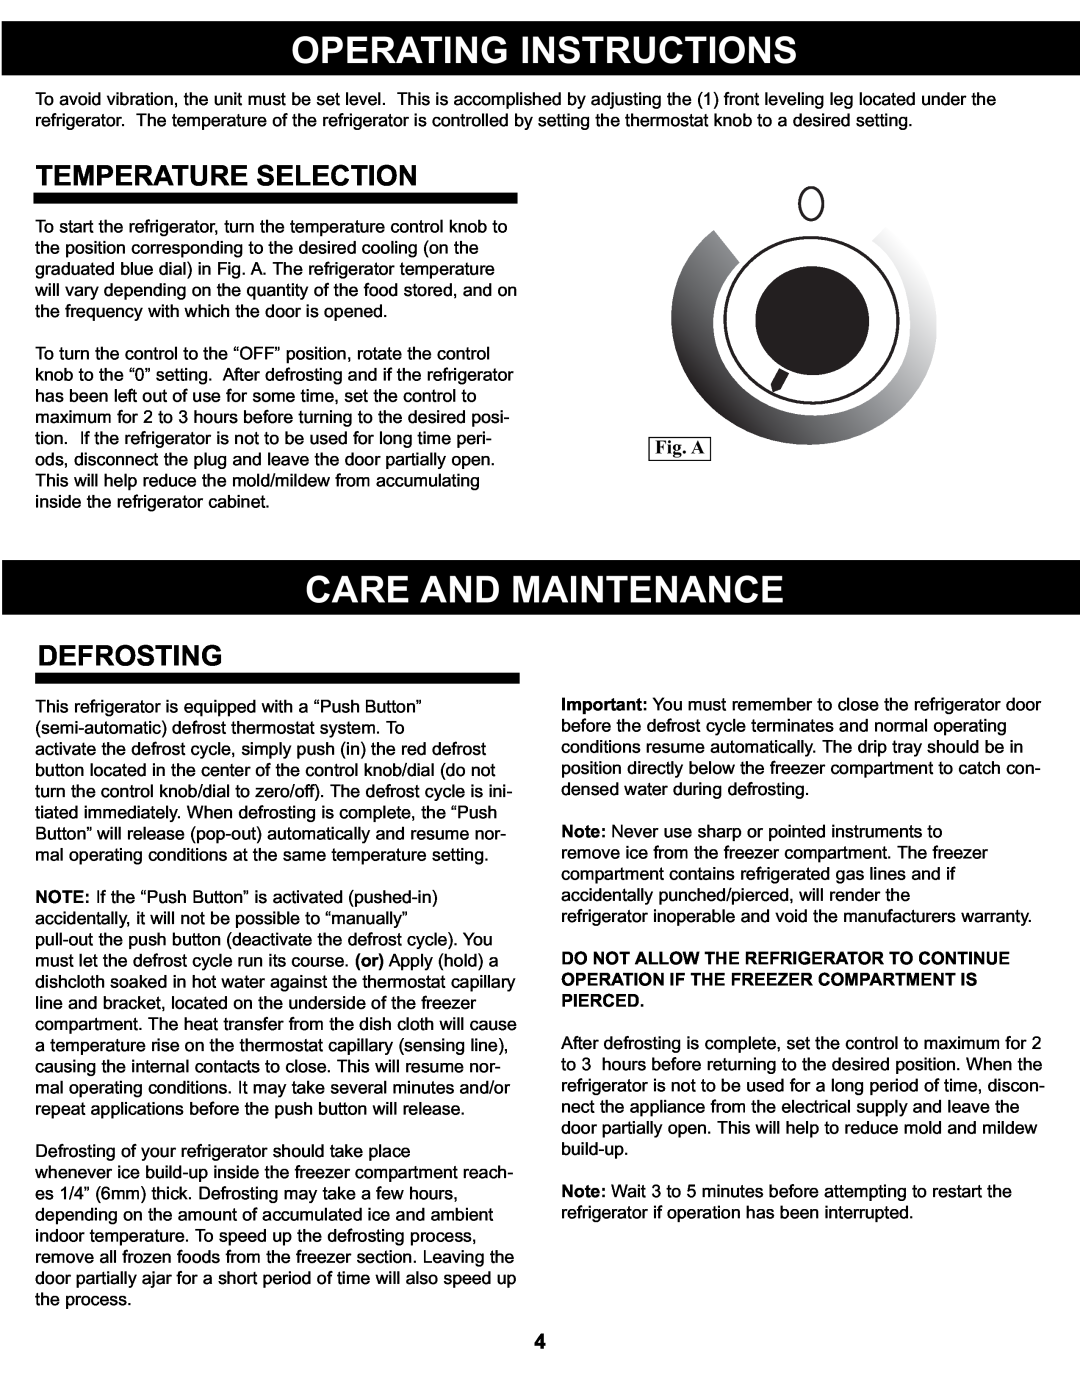 Sunbeam SBCR91BSL manual Operating Instructions, Care And Maintenance, Temperature Selection, Defrosting, Fig. A 